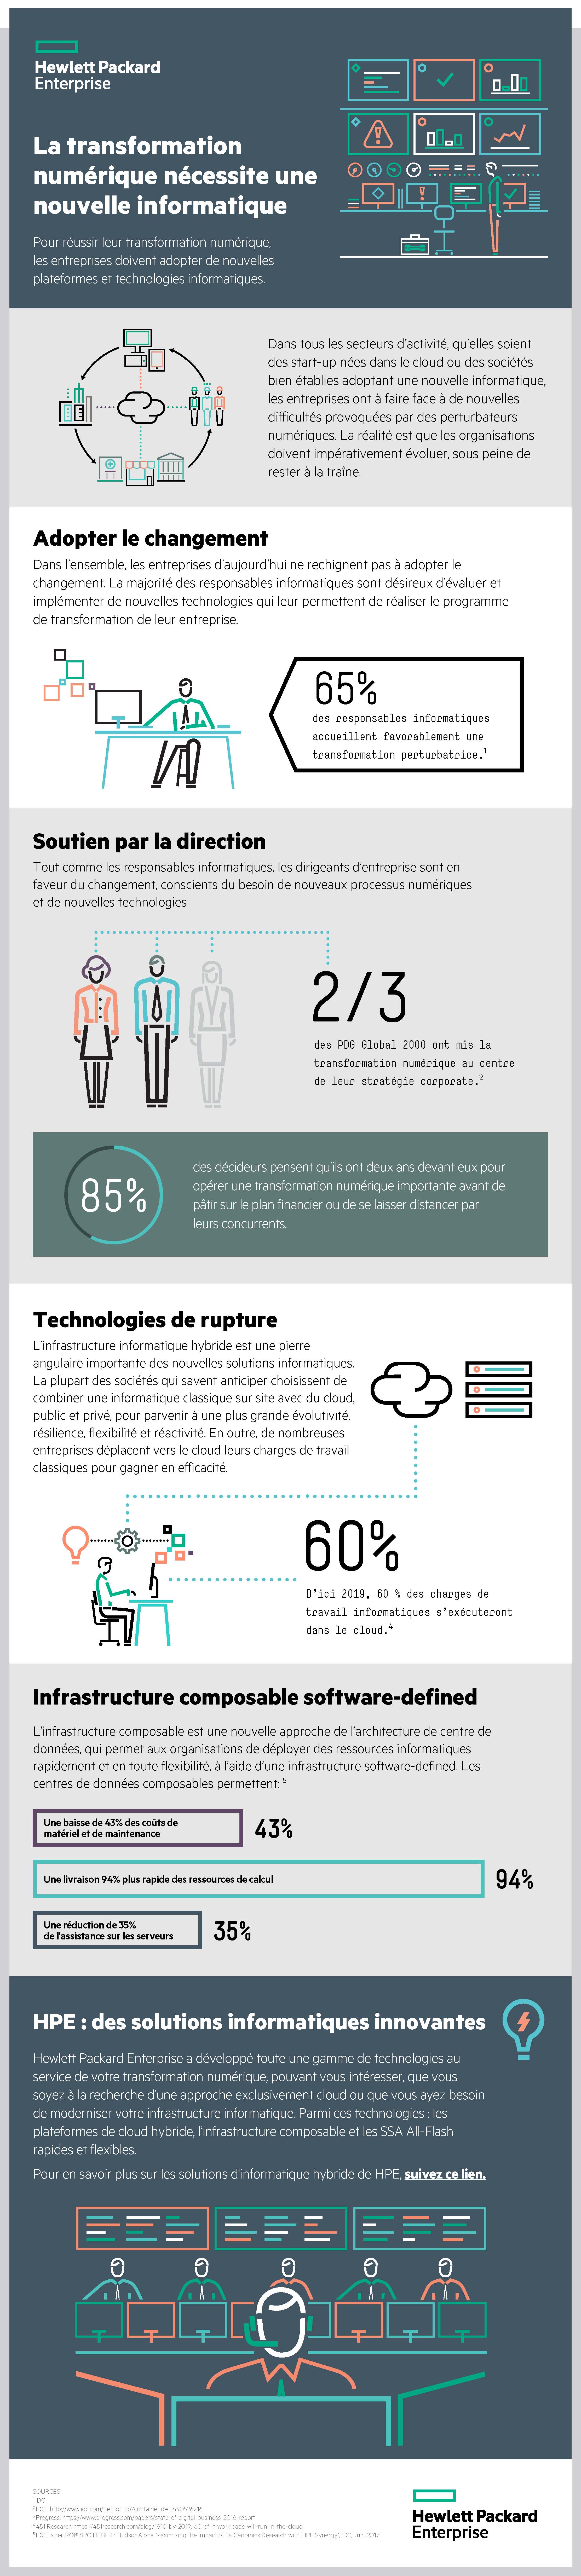 French_Infographic 2 - Digital Transfromation